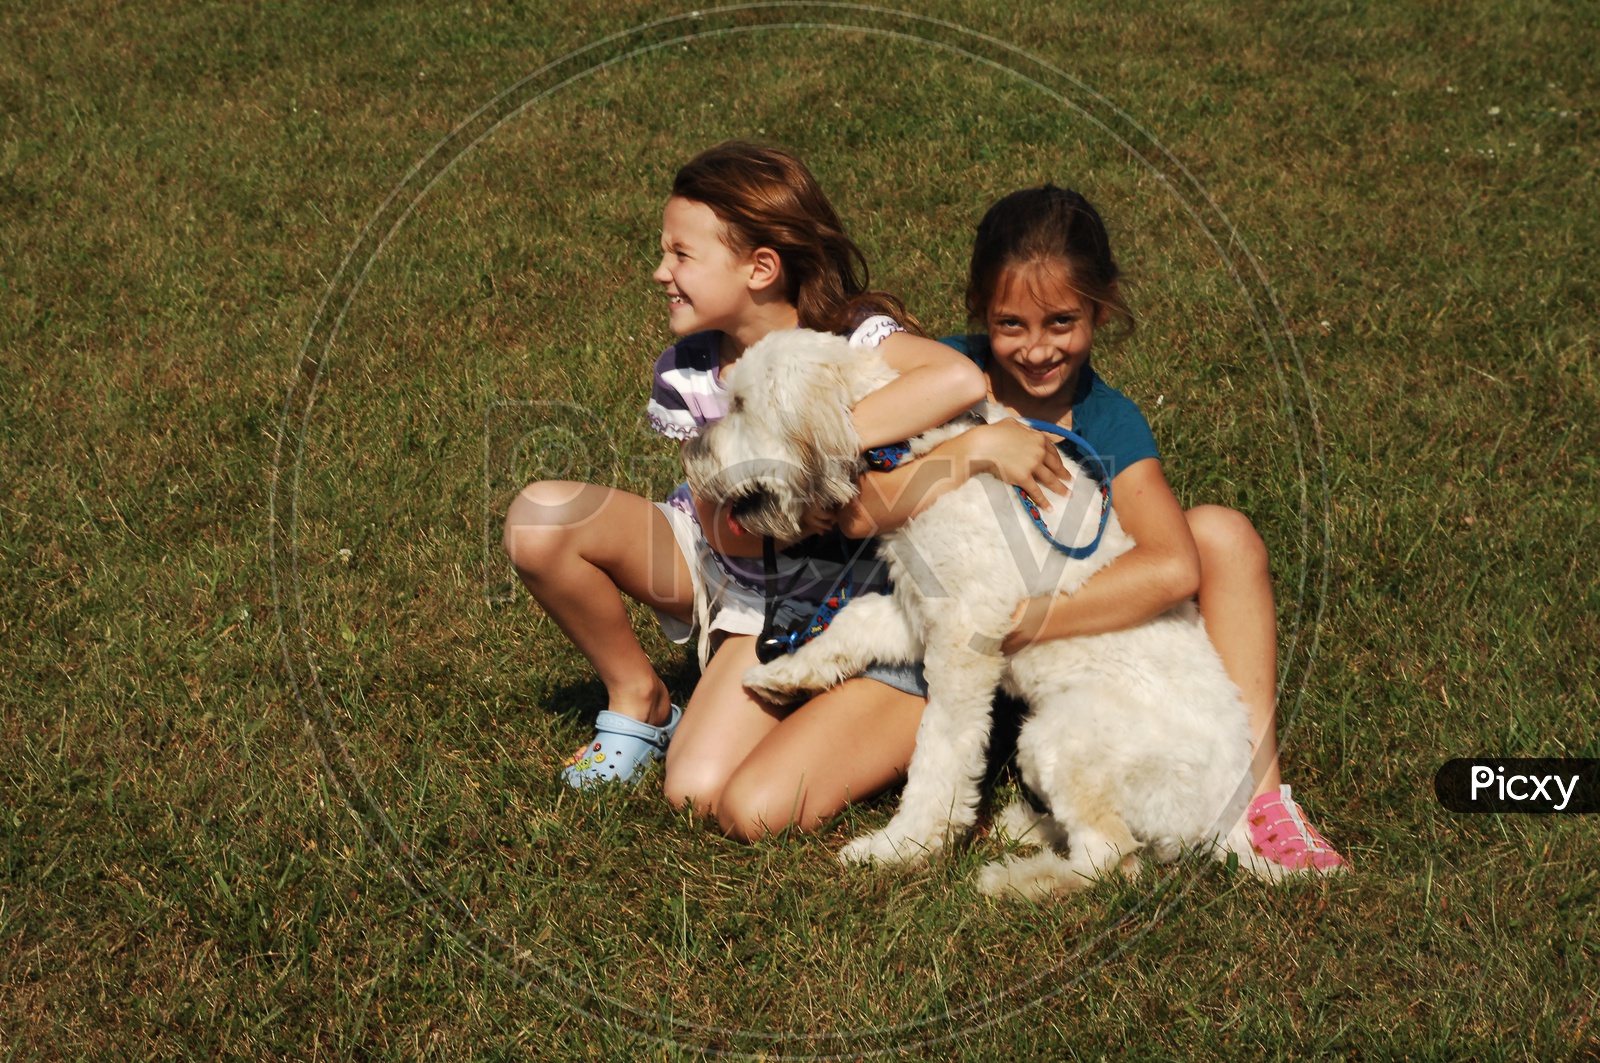 Girl Child Playing With a Dog